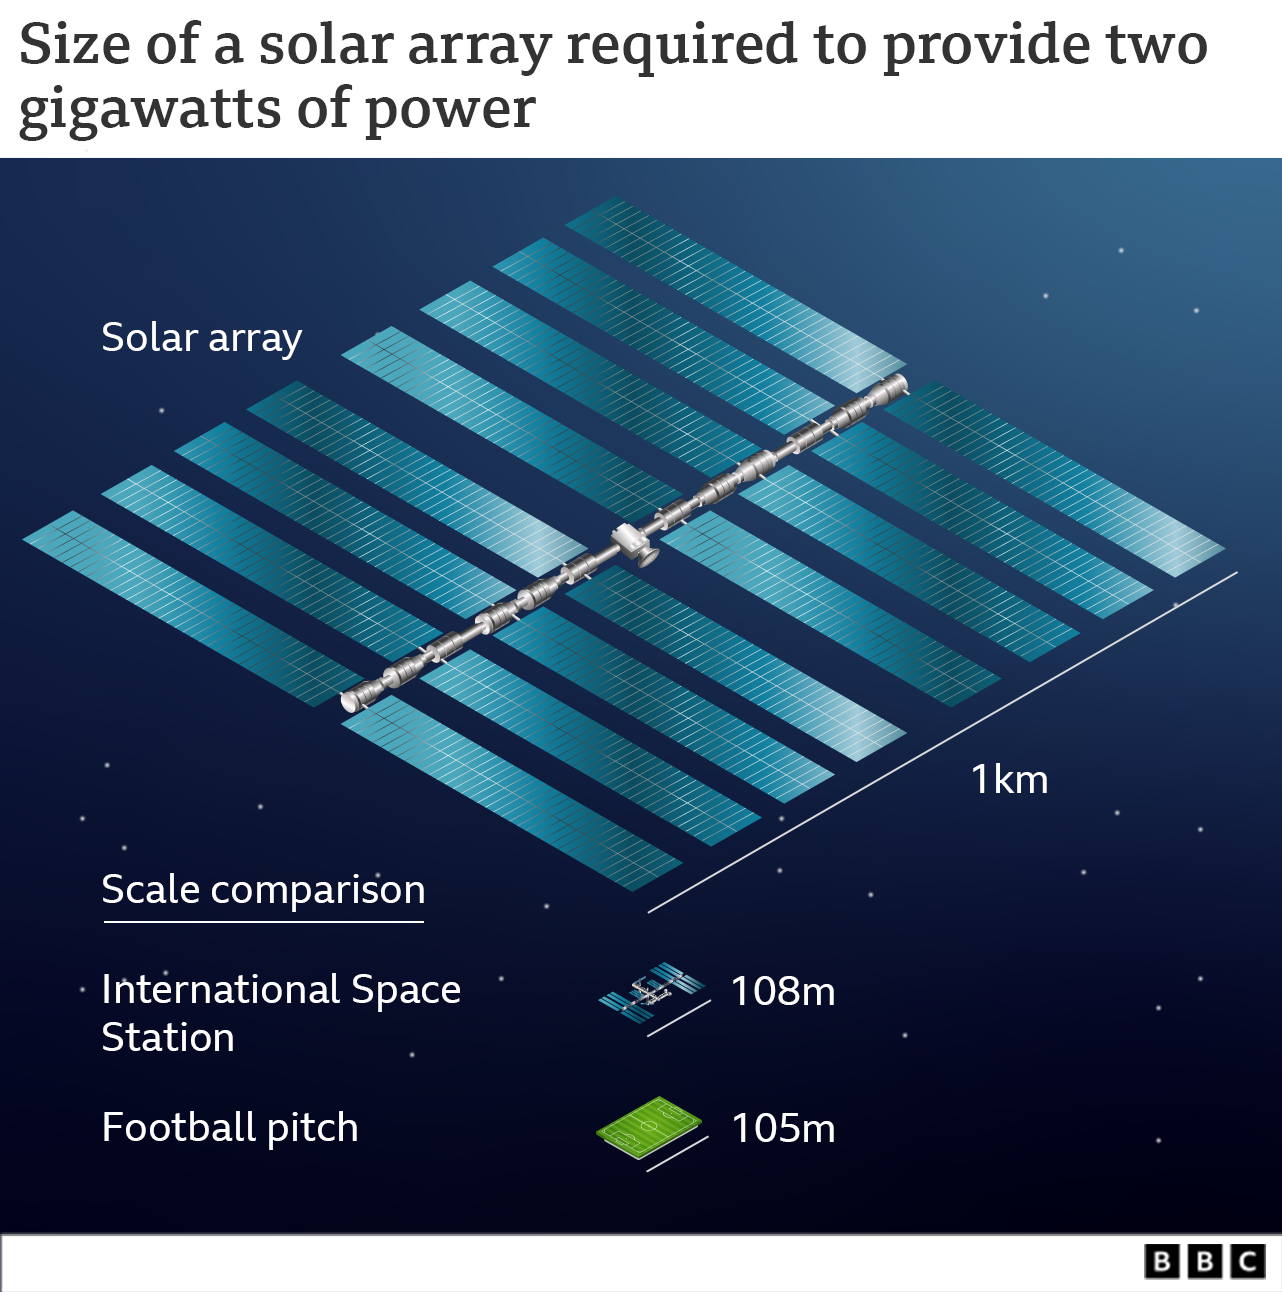 Graphic showing the size of the solar array that would be required to provide two gigawatts of power